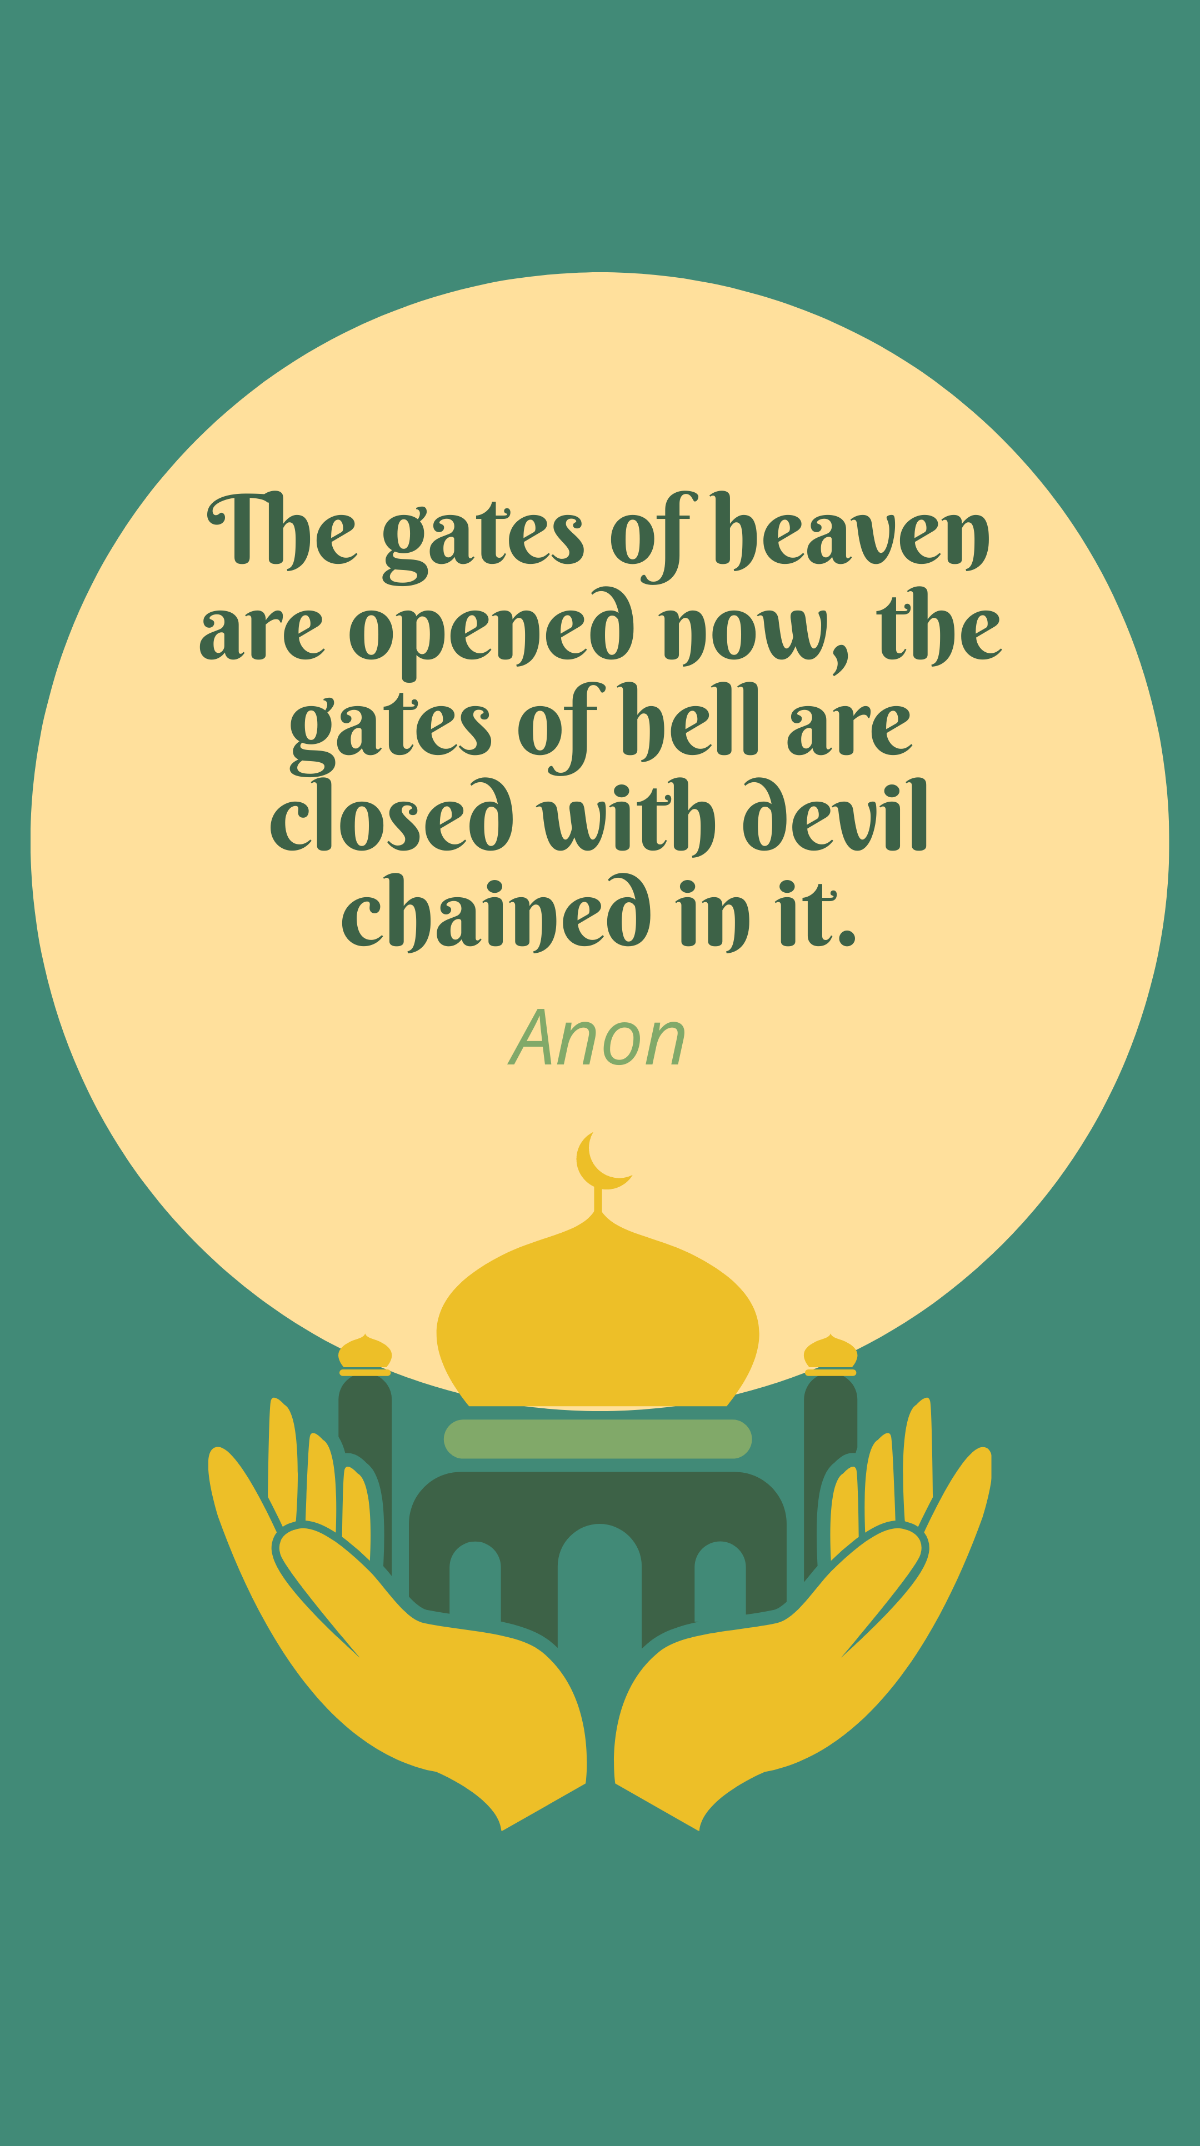 Anon - The gates of heaven are opened now, the gates of hell are closed with devil chained in it. Template